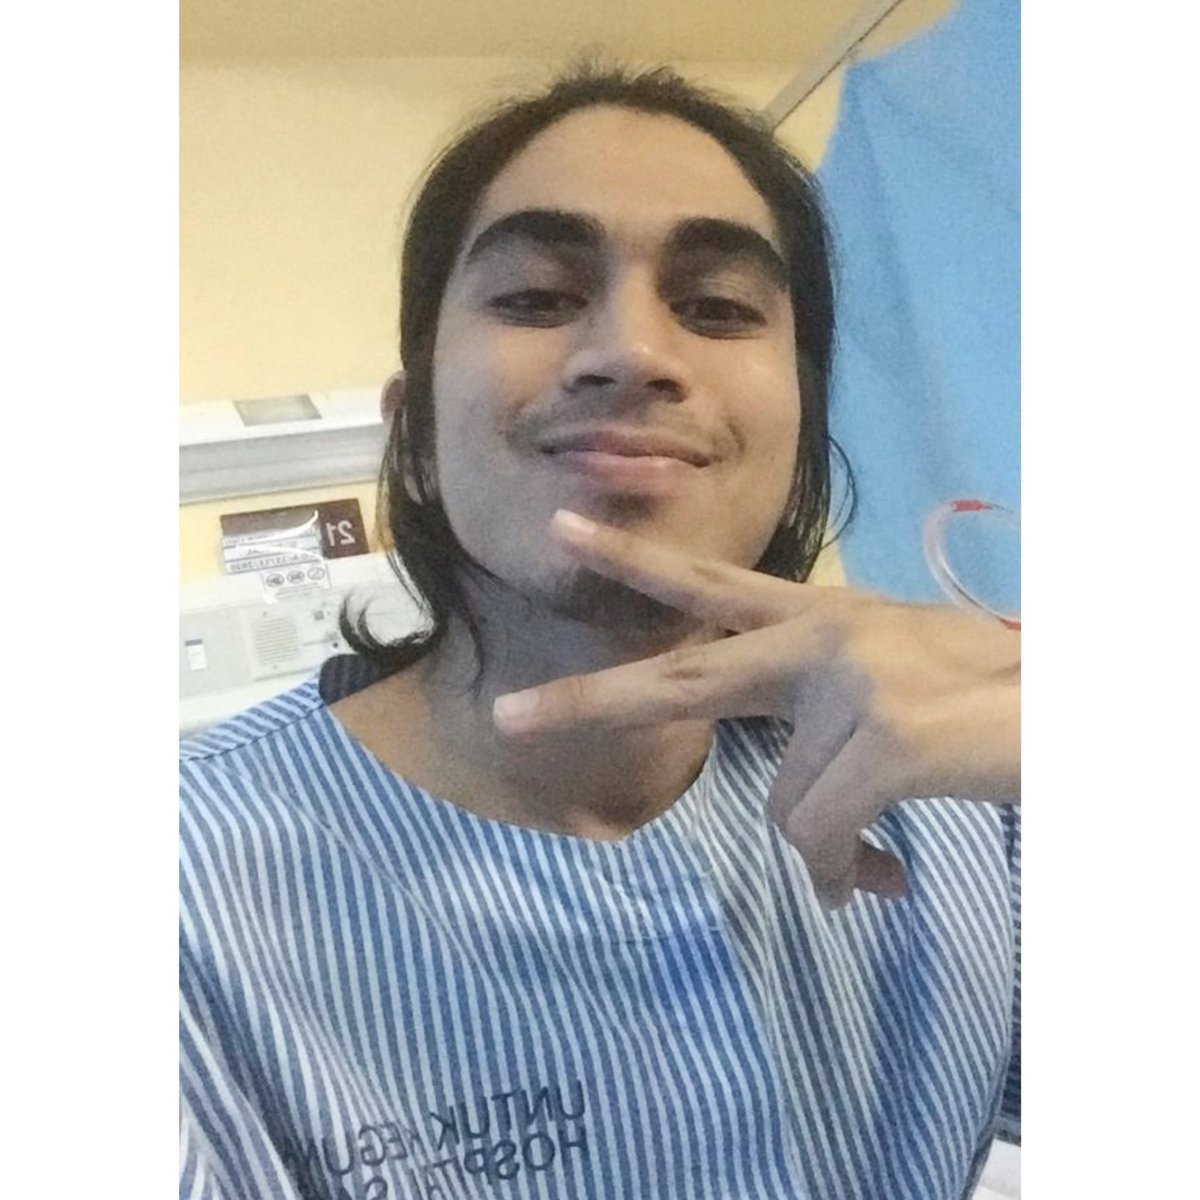 Hi everyone, this is Hakeem. He’s 24 and he is currently fighting to be free from cancer. He’s diagnosed with Stage 4 colon adenocarcinoma with liver, lung and paraaortic lymph node metastasis. Please help me RT and keep him in your prayers! 